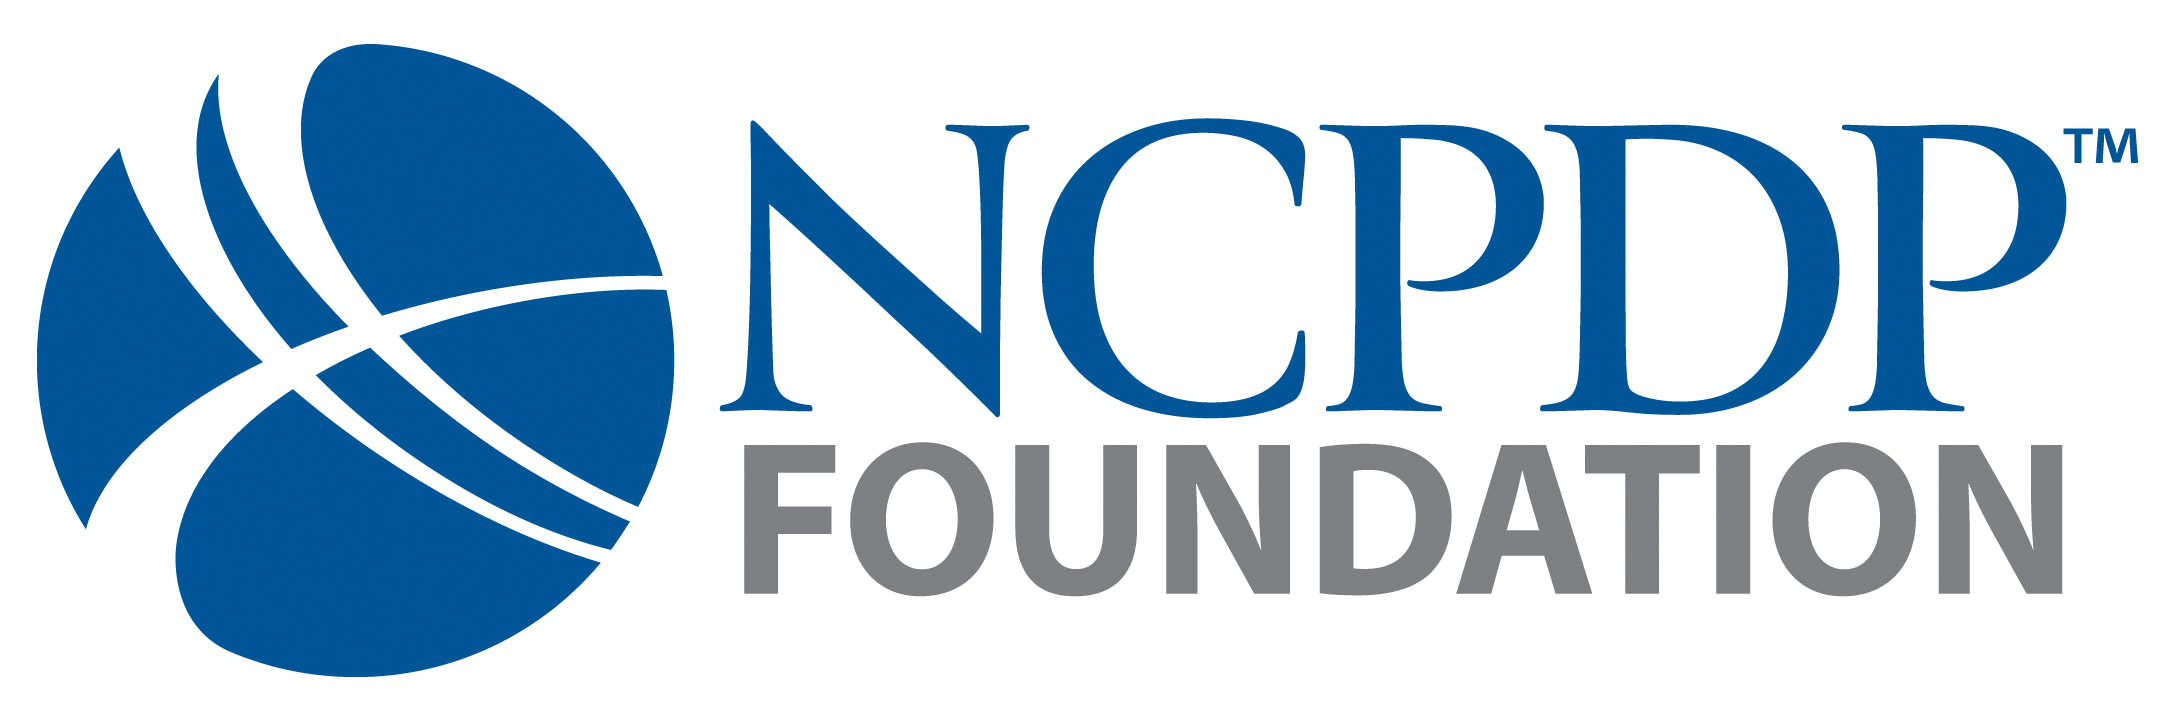 2020 NCPDP Foundation Silent Auction